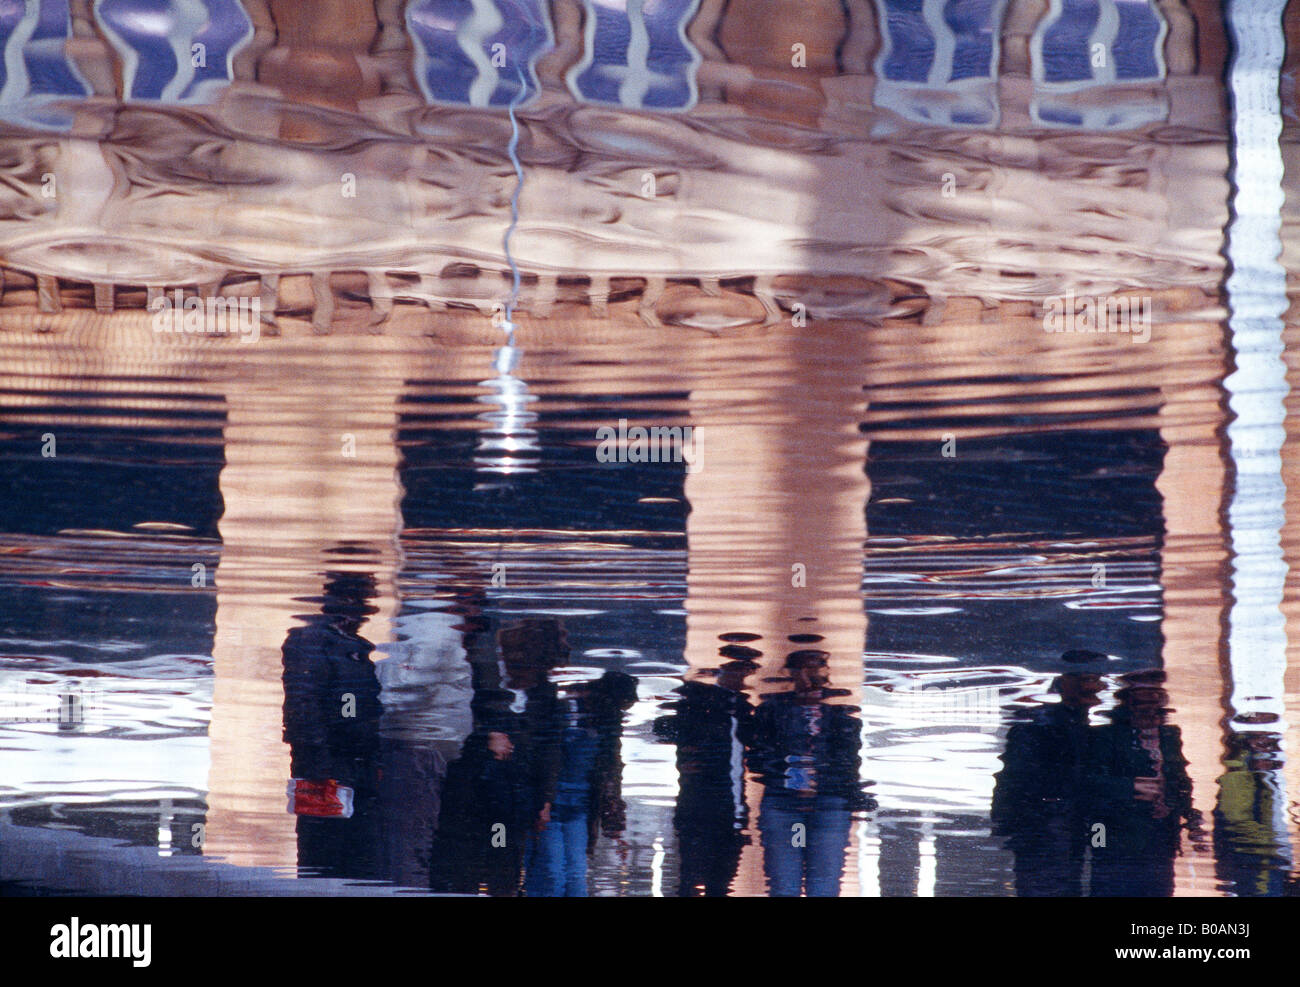 Reflection of people on water. Stock Photo